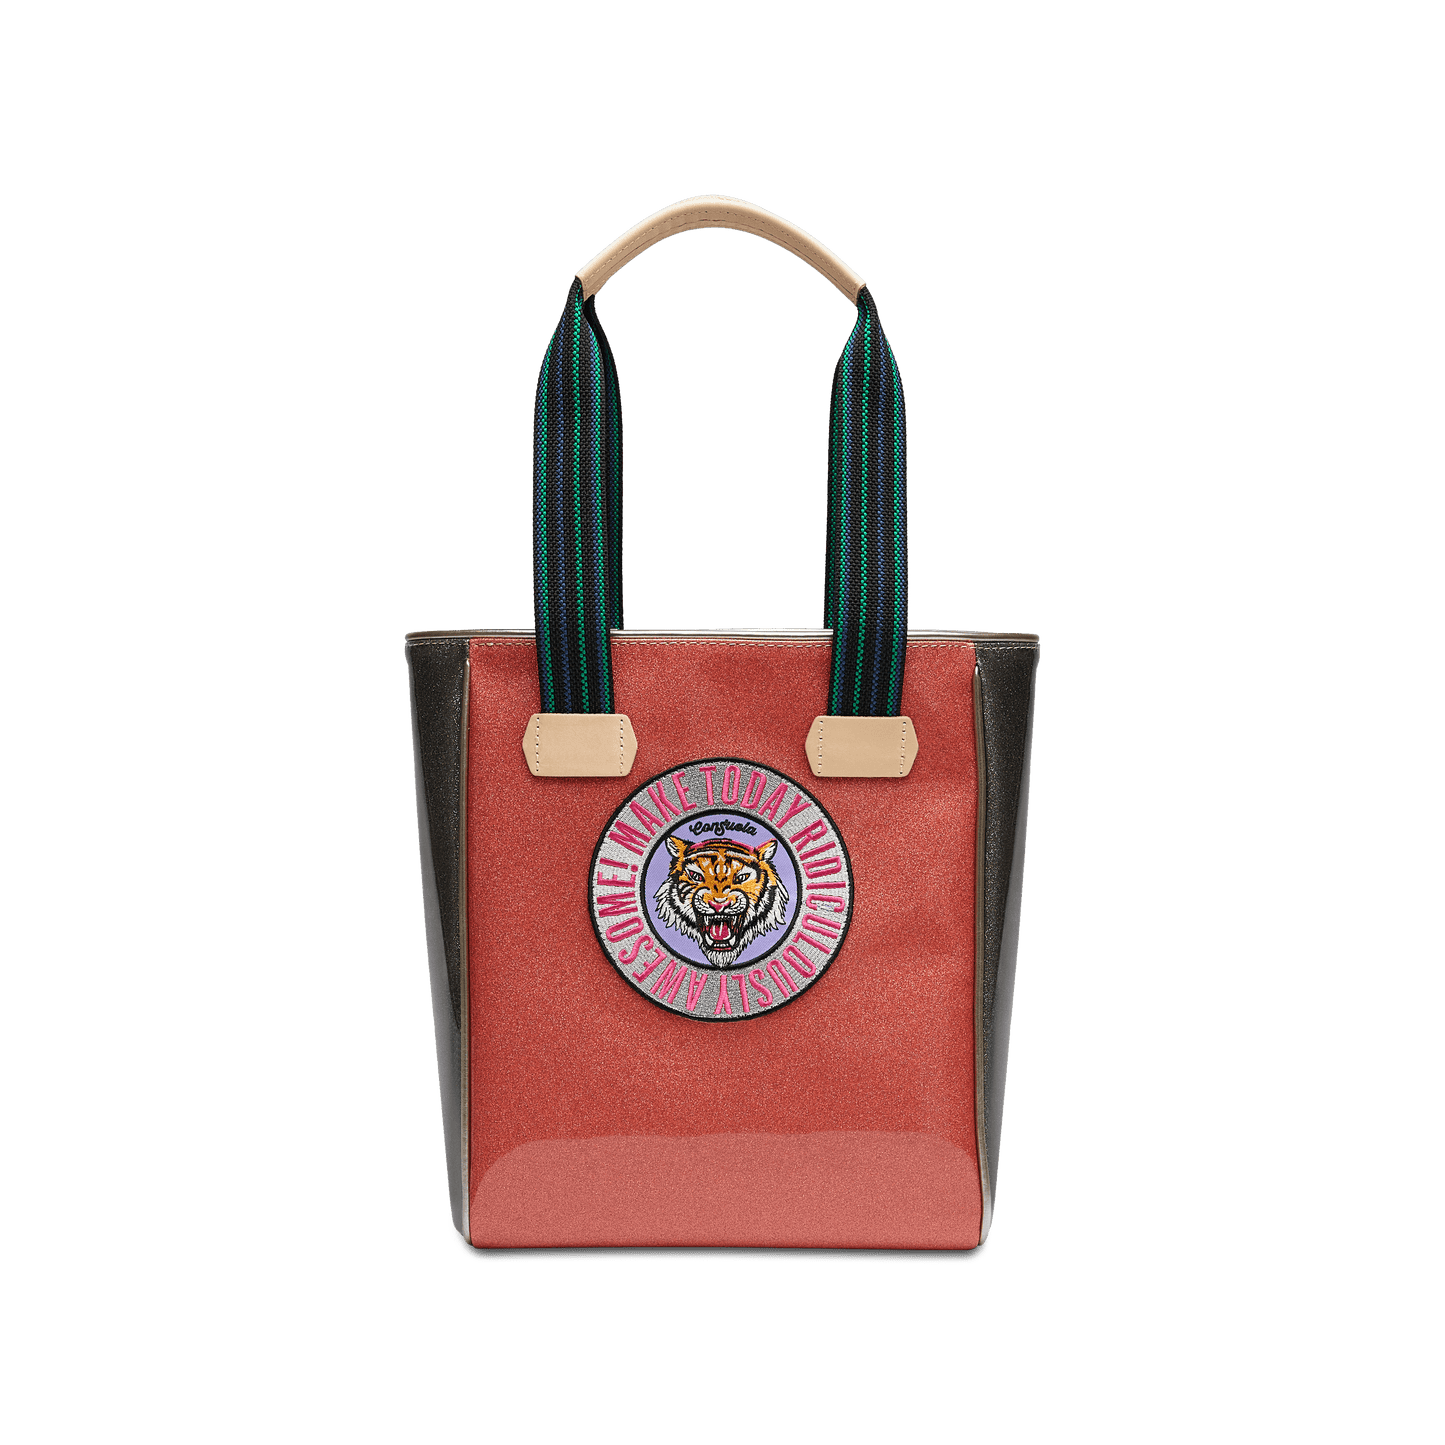 ADRIAN CHICA TOTE